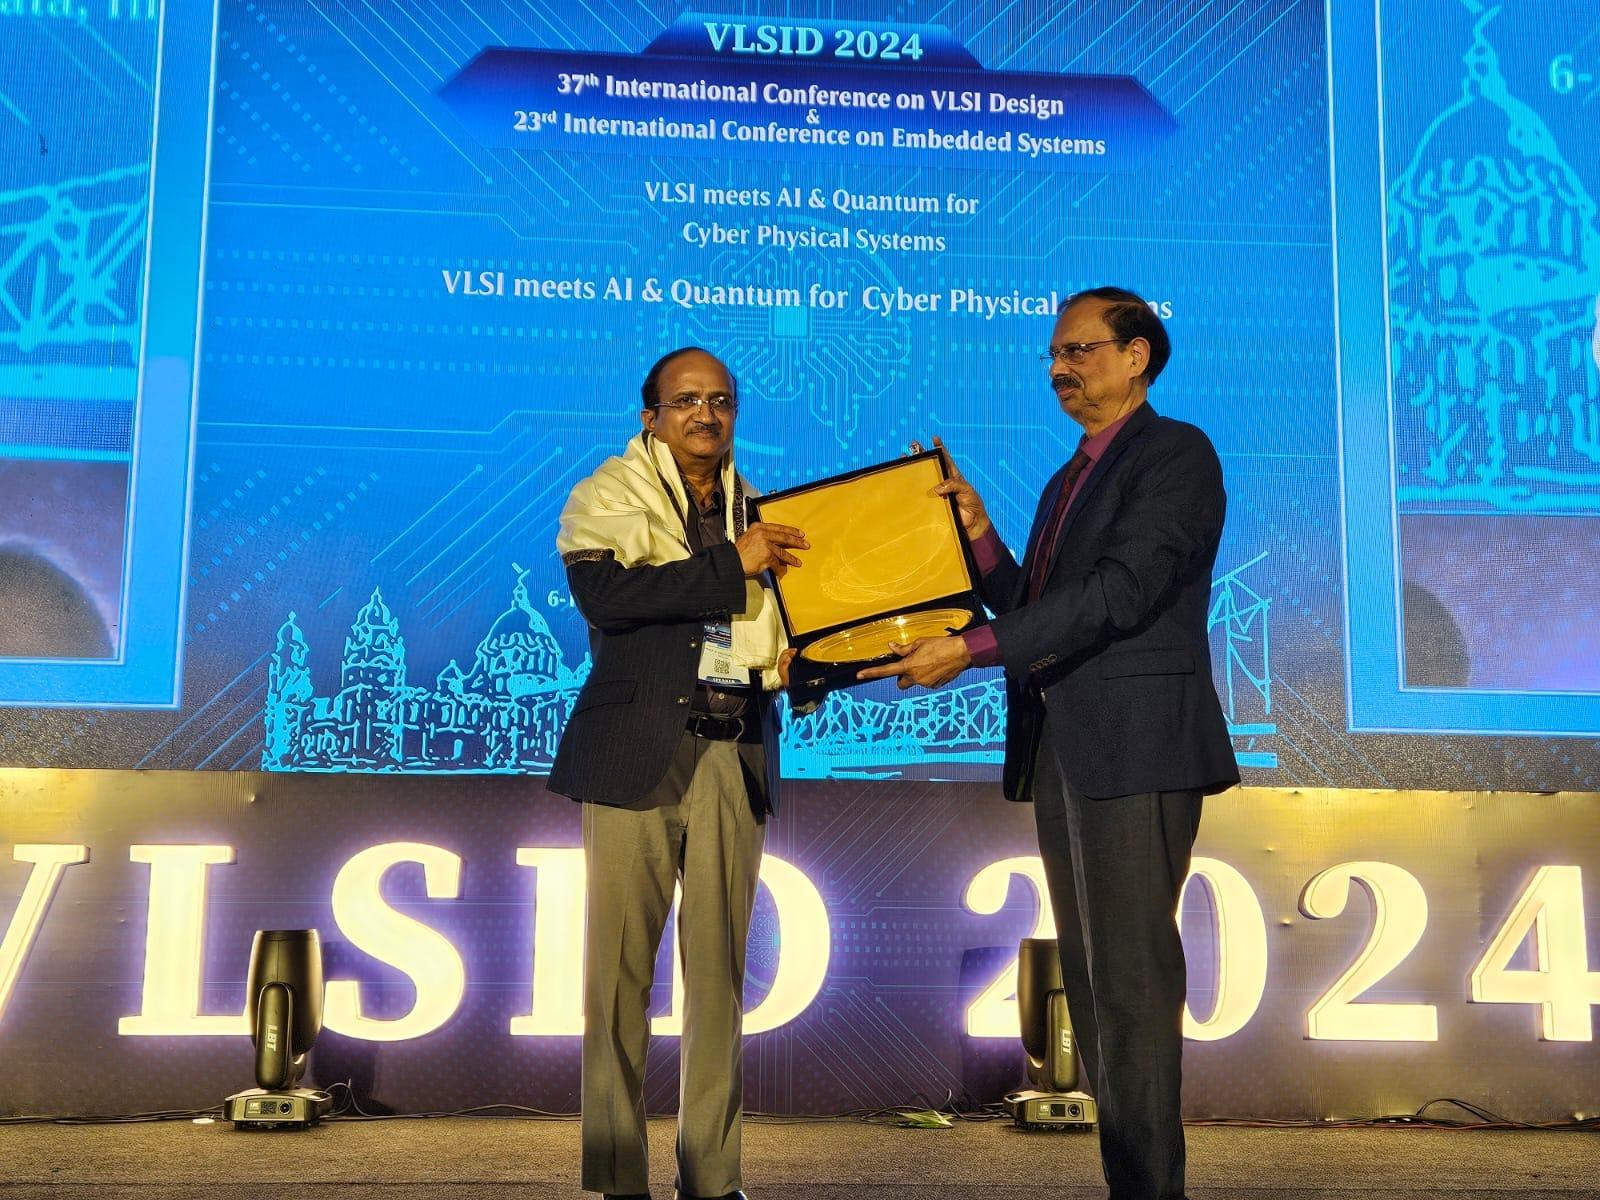 BITS Pilani VC Prof. Ramgopal Rao gets VLSI Lifetime Achievement Award 2024 at the 37th International VLSI Design Conference 2024 held in Kolkata, during January 6-10, 2024 presented by the VLSI Society of India